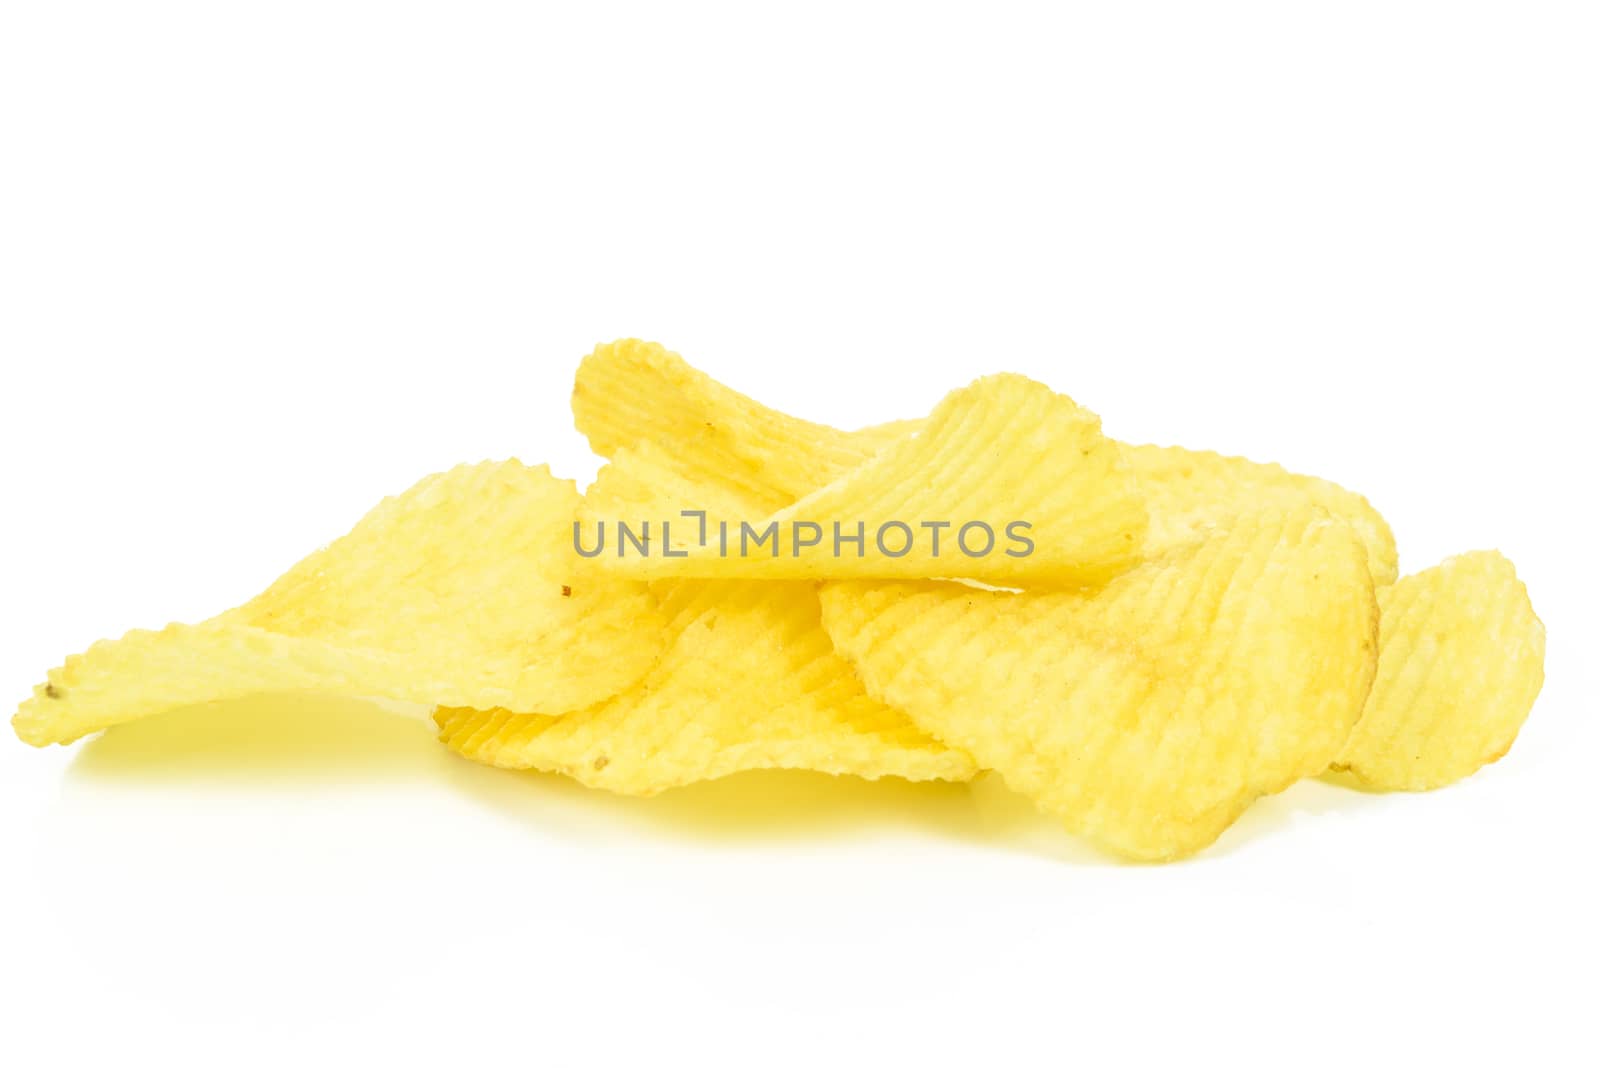 Group of crispy potato chips in close-up isolated on a white background.